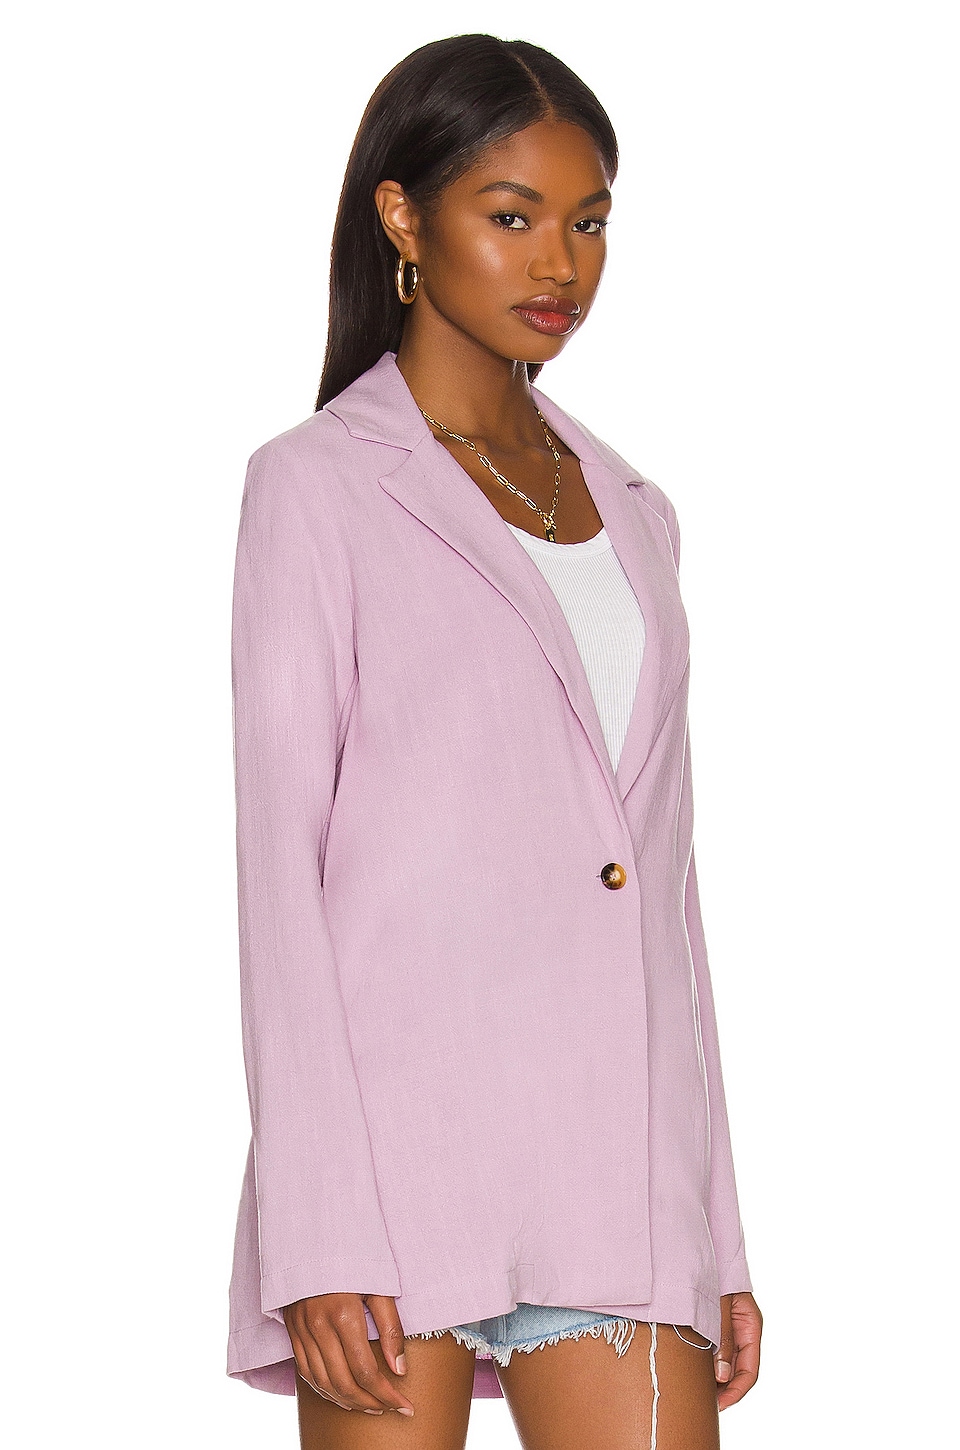 Women's Blazers Without Shoulder Pads